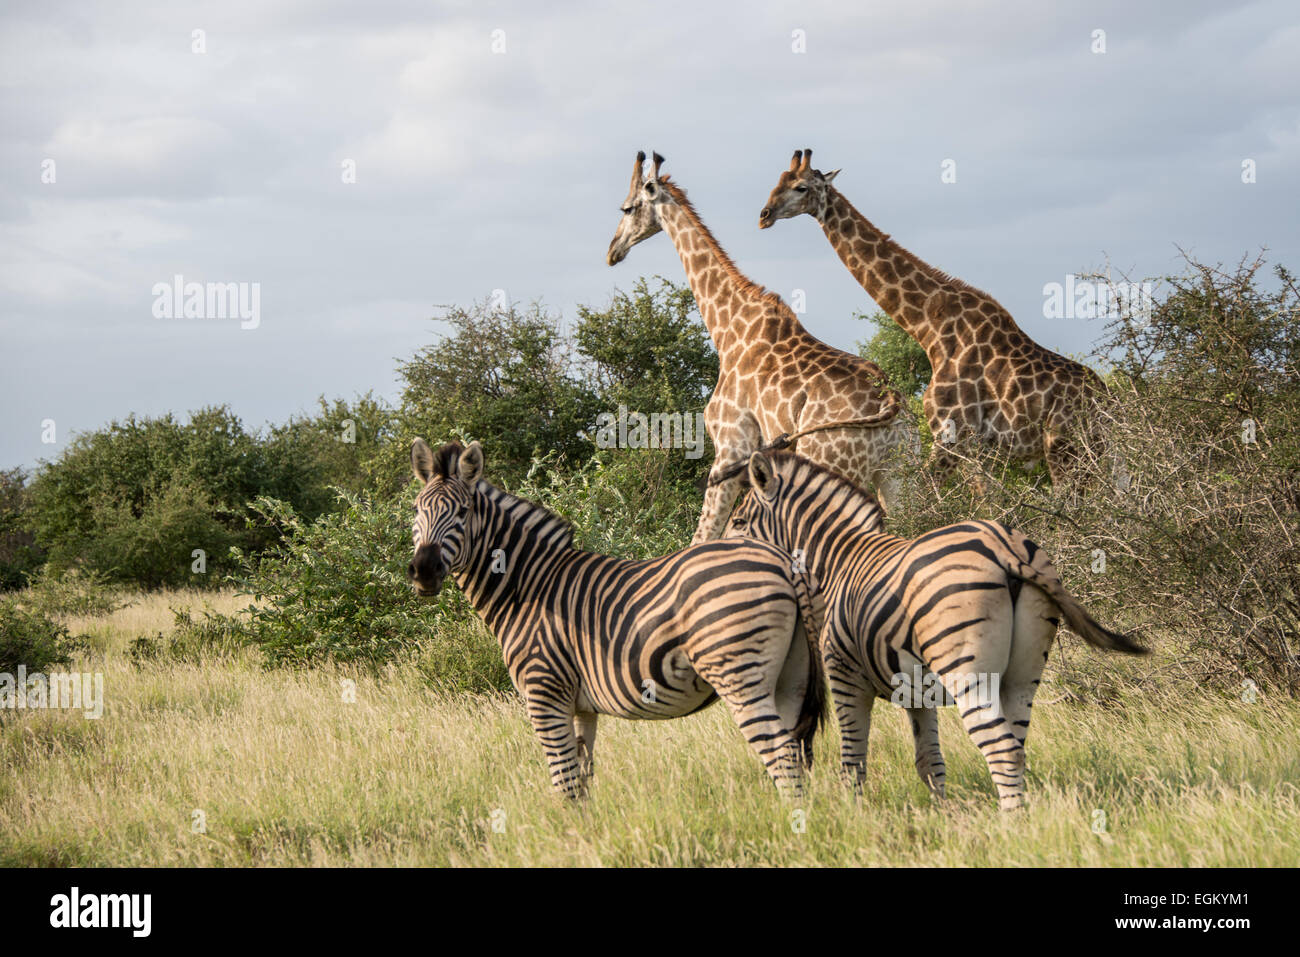 A group of African animals on the Savannah. Stock Photo